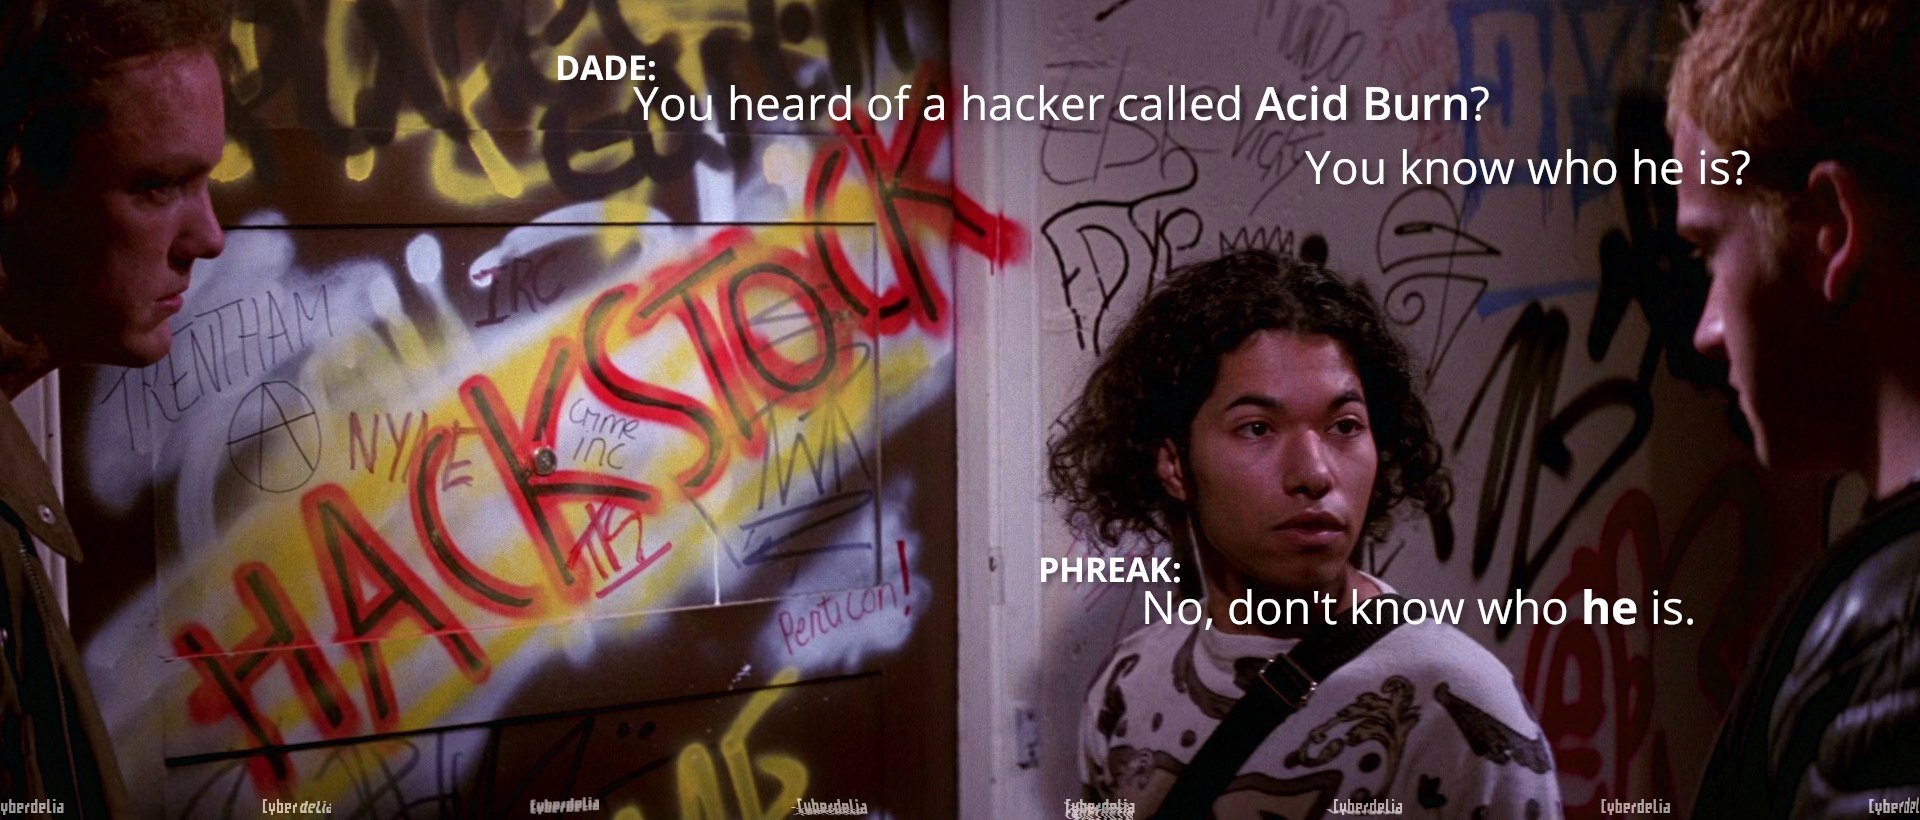 Hackers (1995) scene, Dade, Phreak and Cereal talking outside Nikon's apartment door. Dade: You heard of a hacker called Acid Burn? You know who he is? Phreak: No, don't know who he is. (Acid Burn of course a woman hacker played by Angelina Jolie)